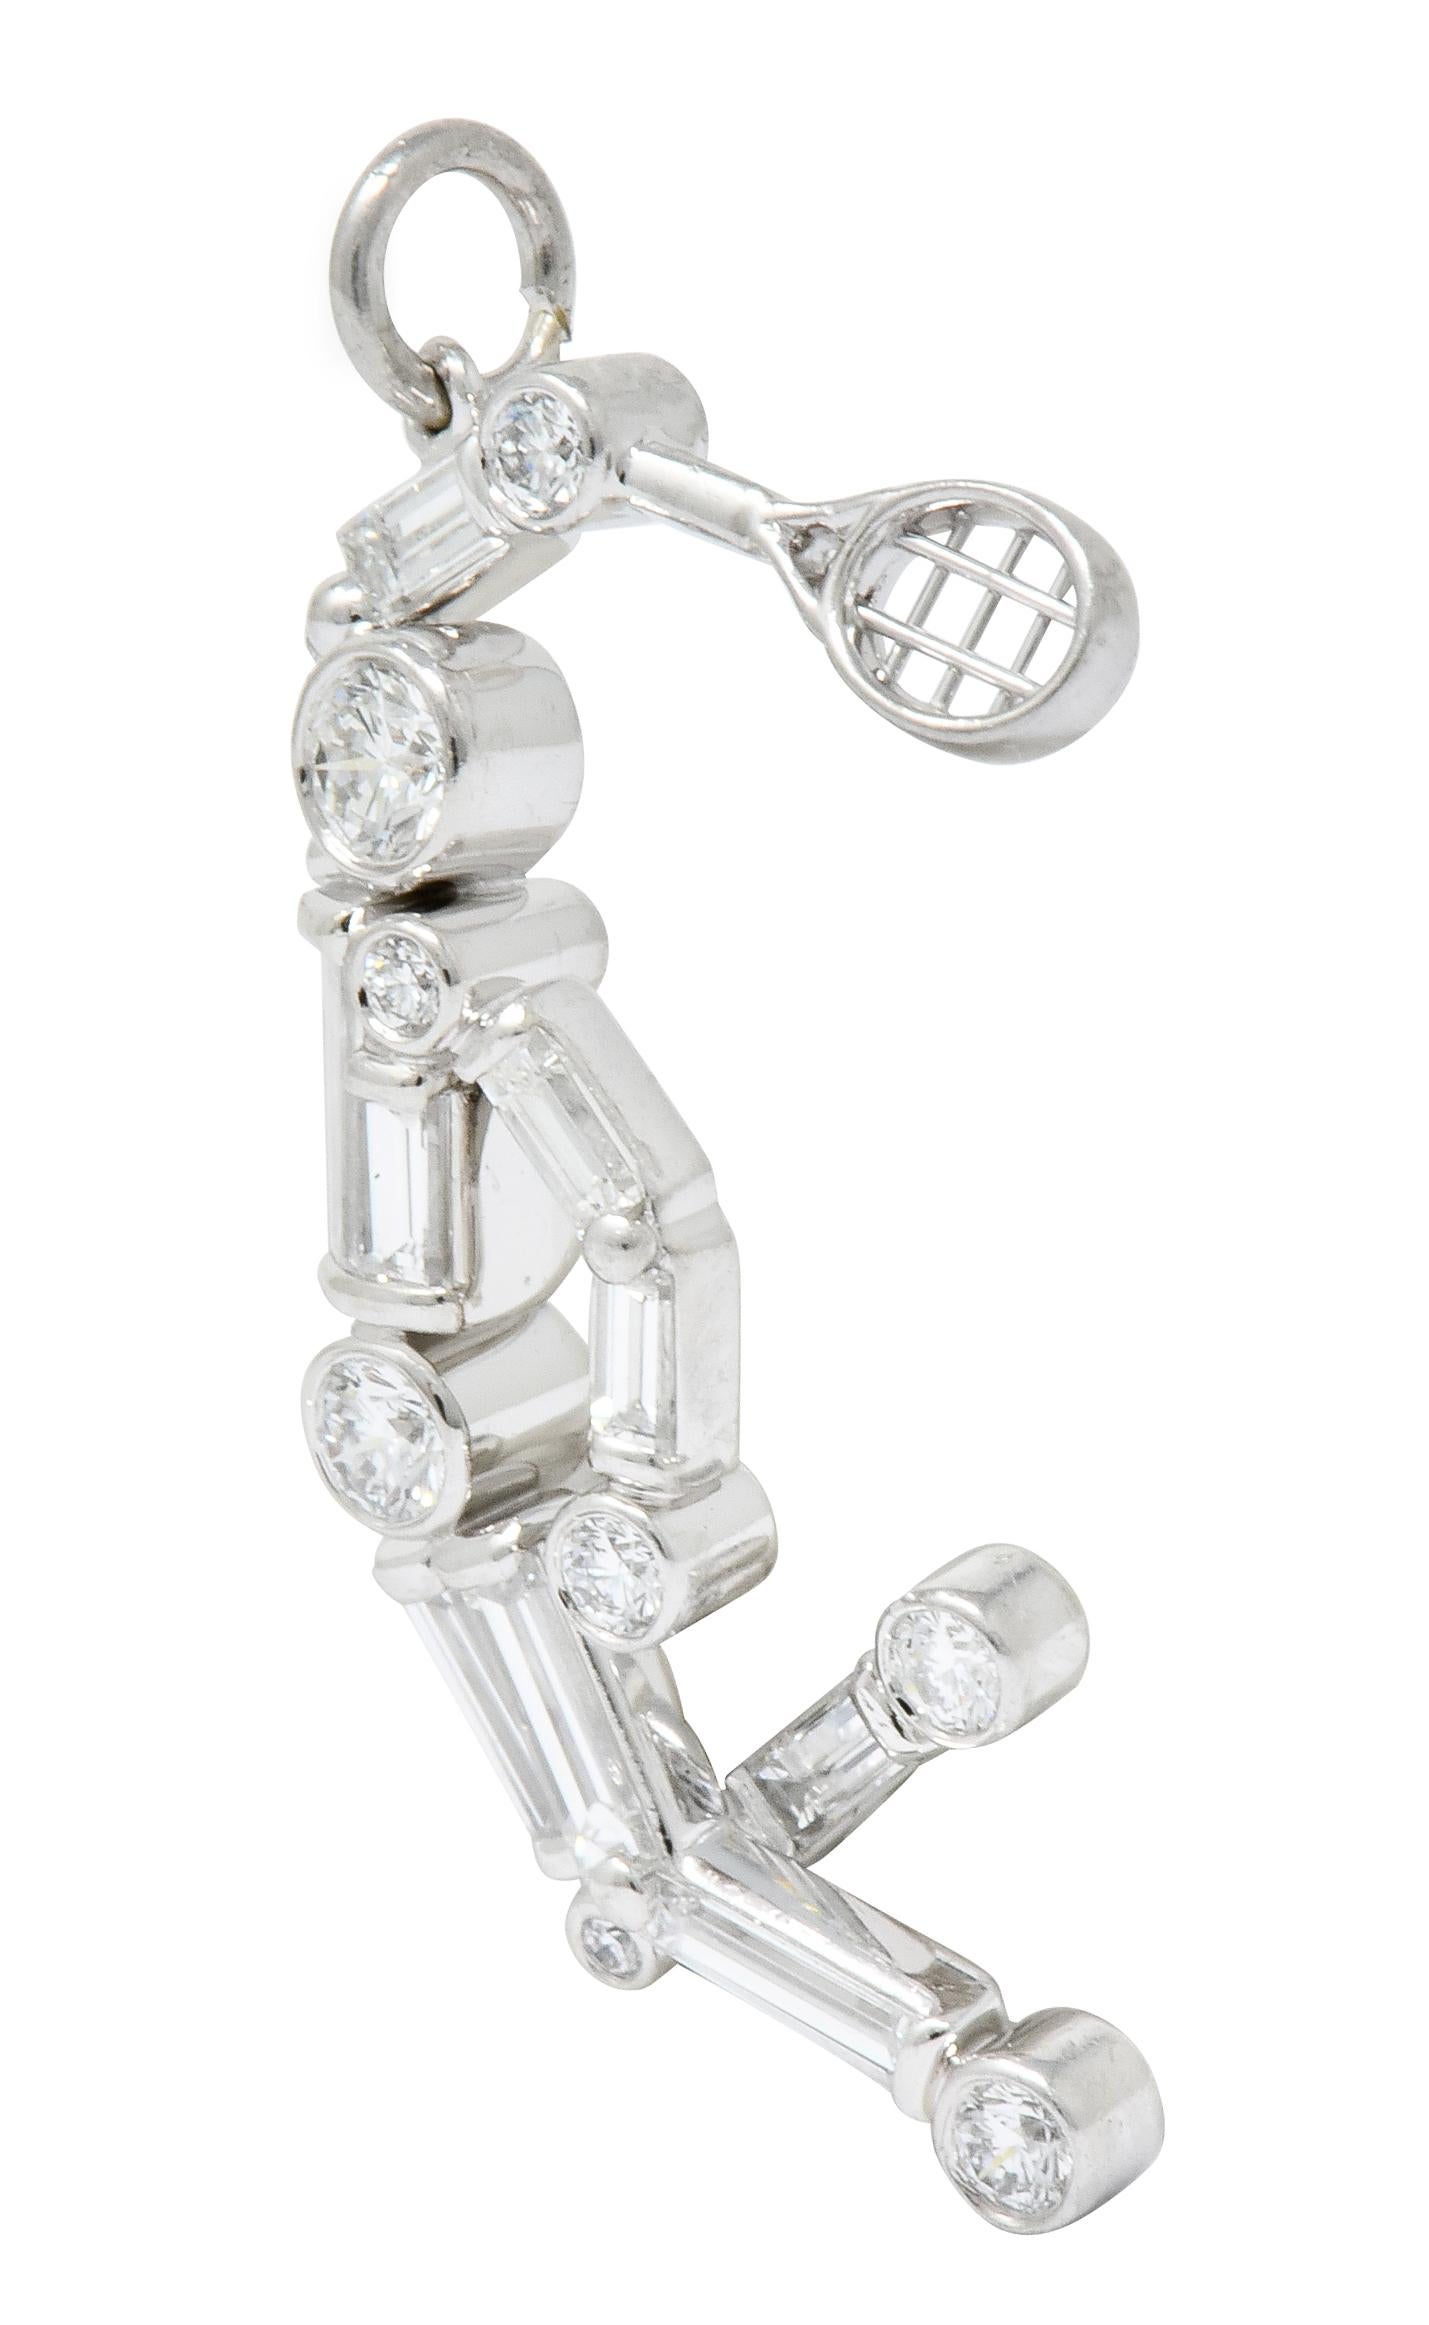 Charm designed as a stylized tennis player mid-jump weilding a racket

Figure is comprised of bezel set round brilliant and baguette cut diamonds weighing approximately 0.90 carat, F/G color and VS clarity

Completed by jump ring bale

Numbered with